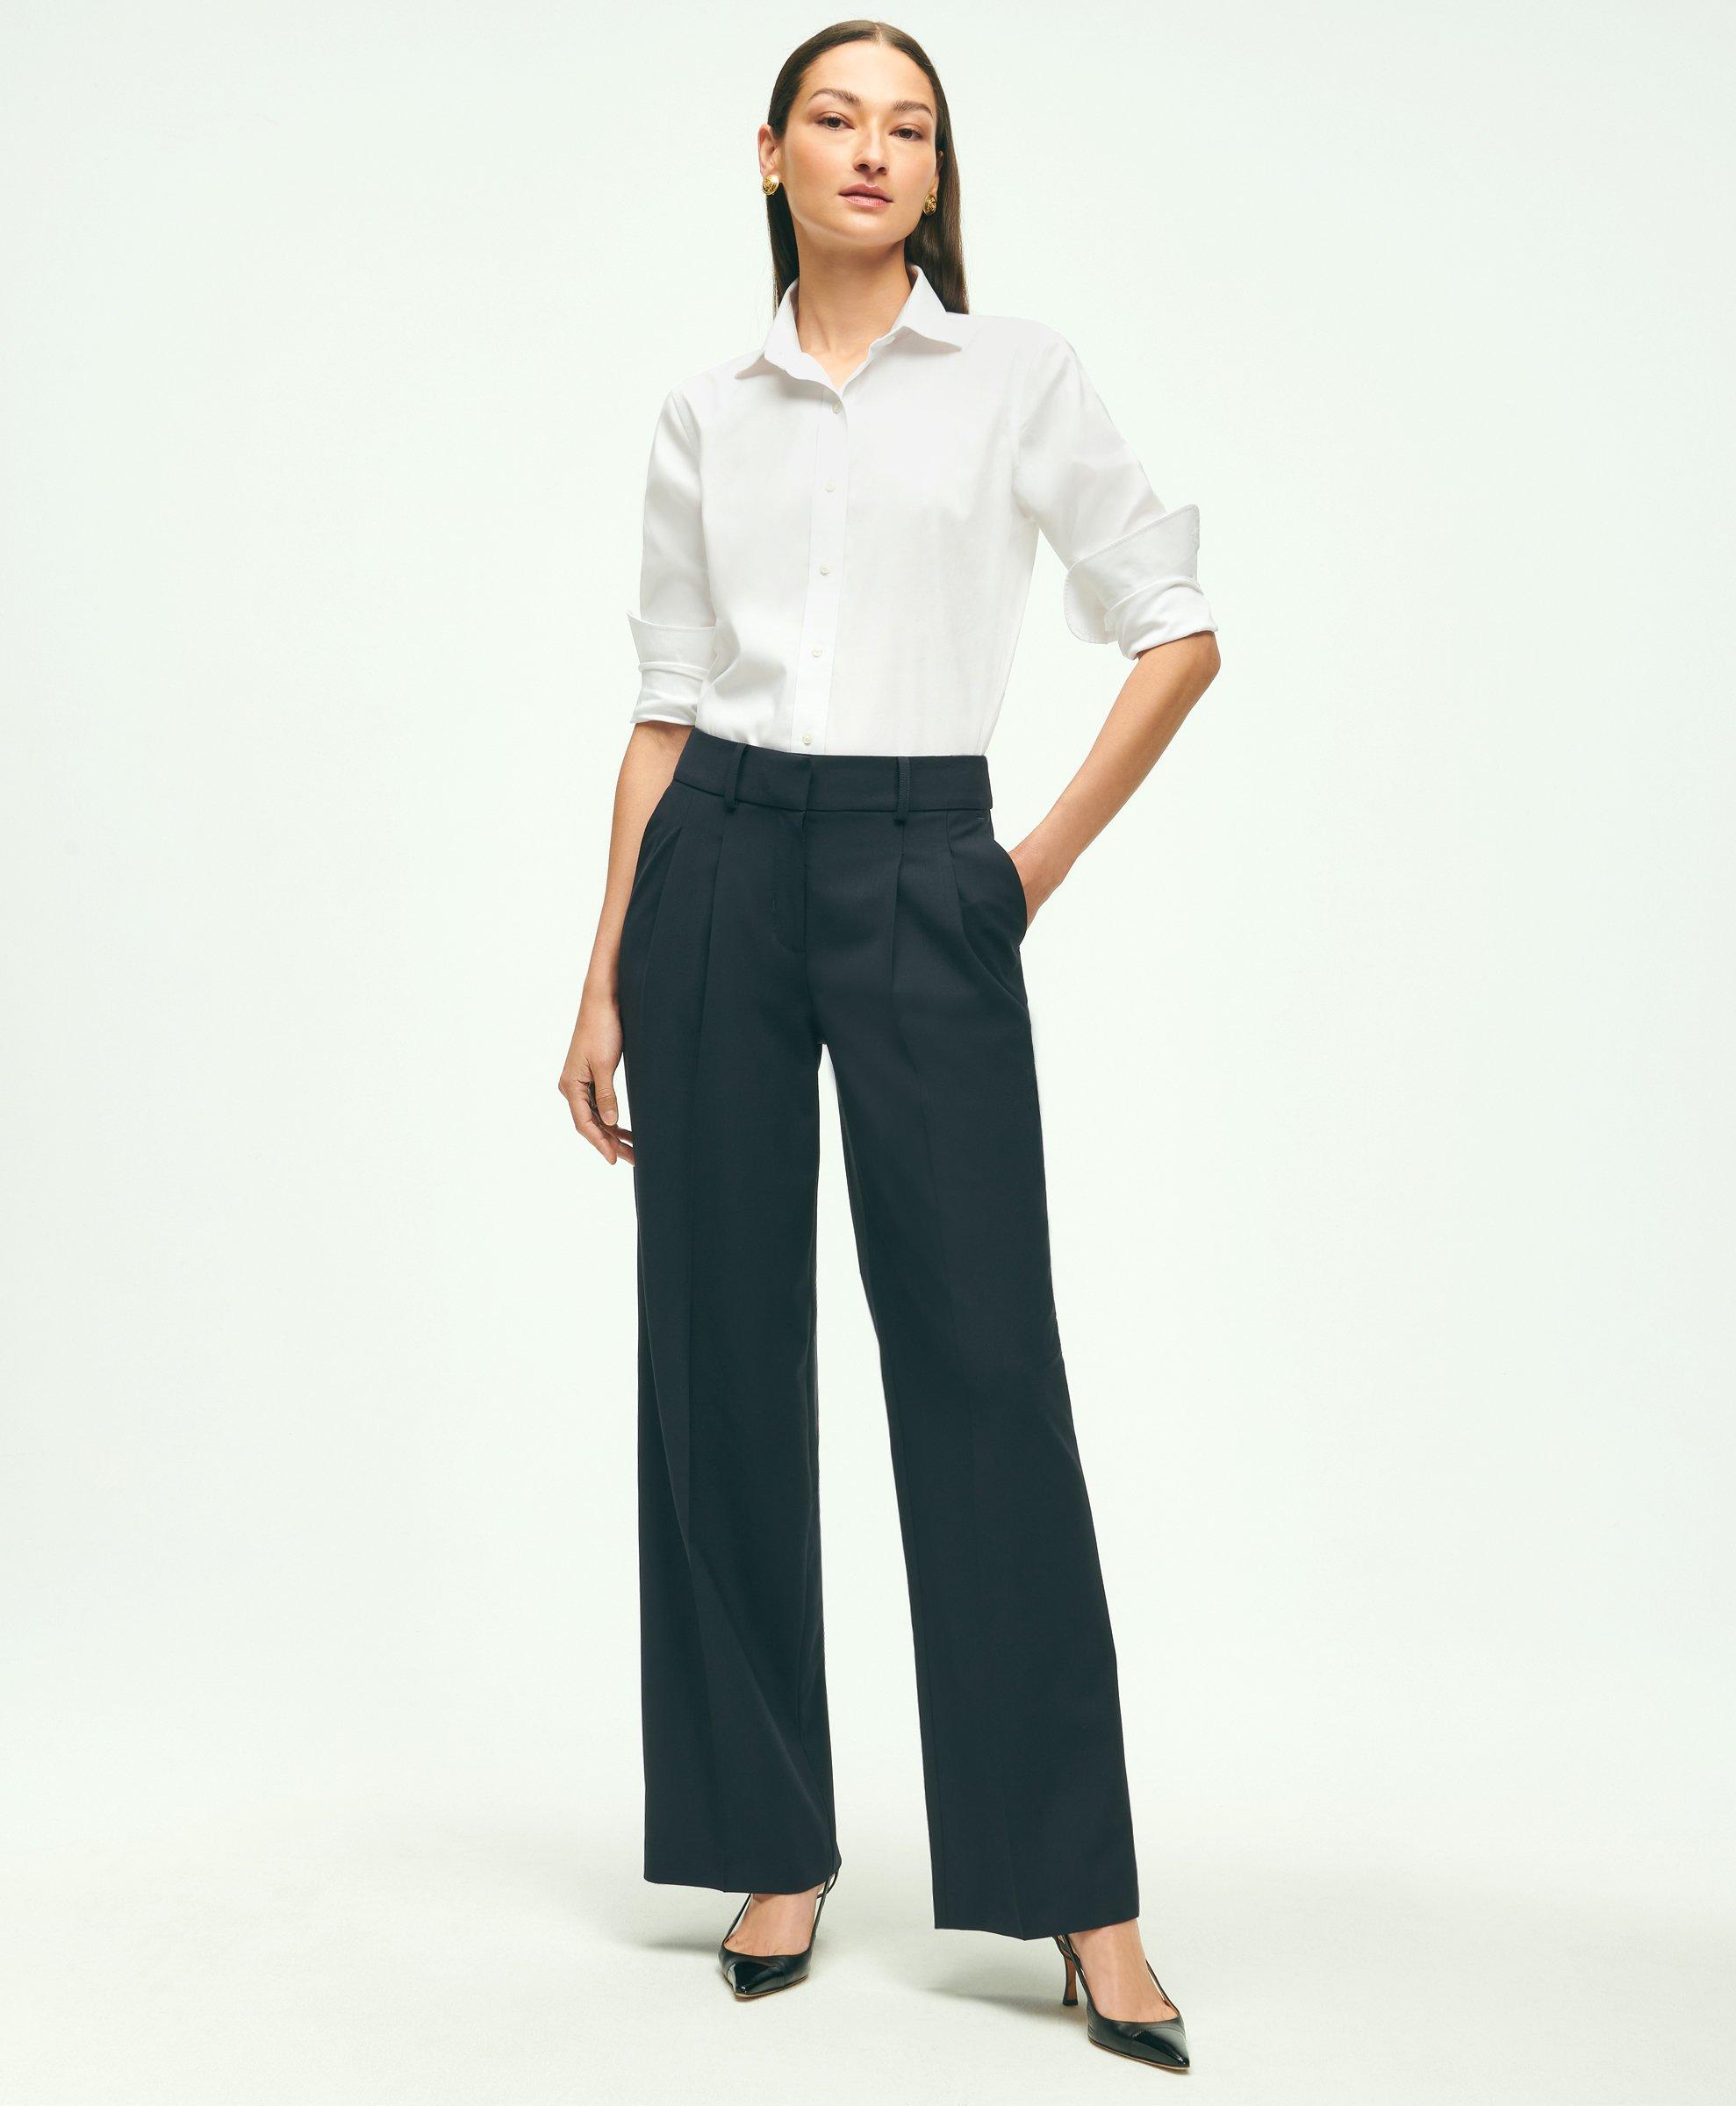 Everlane The Side Zip Stretch Cotton Pant Women’s Navy Elastic Waist  Trousers 2